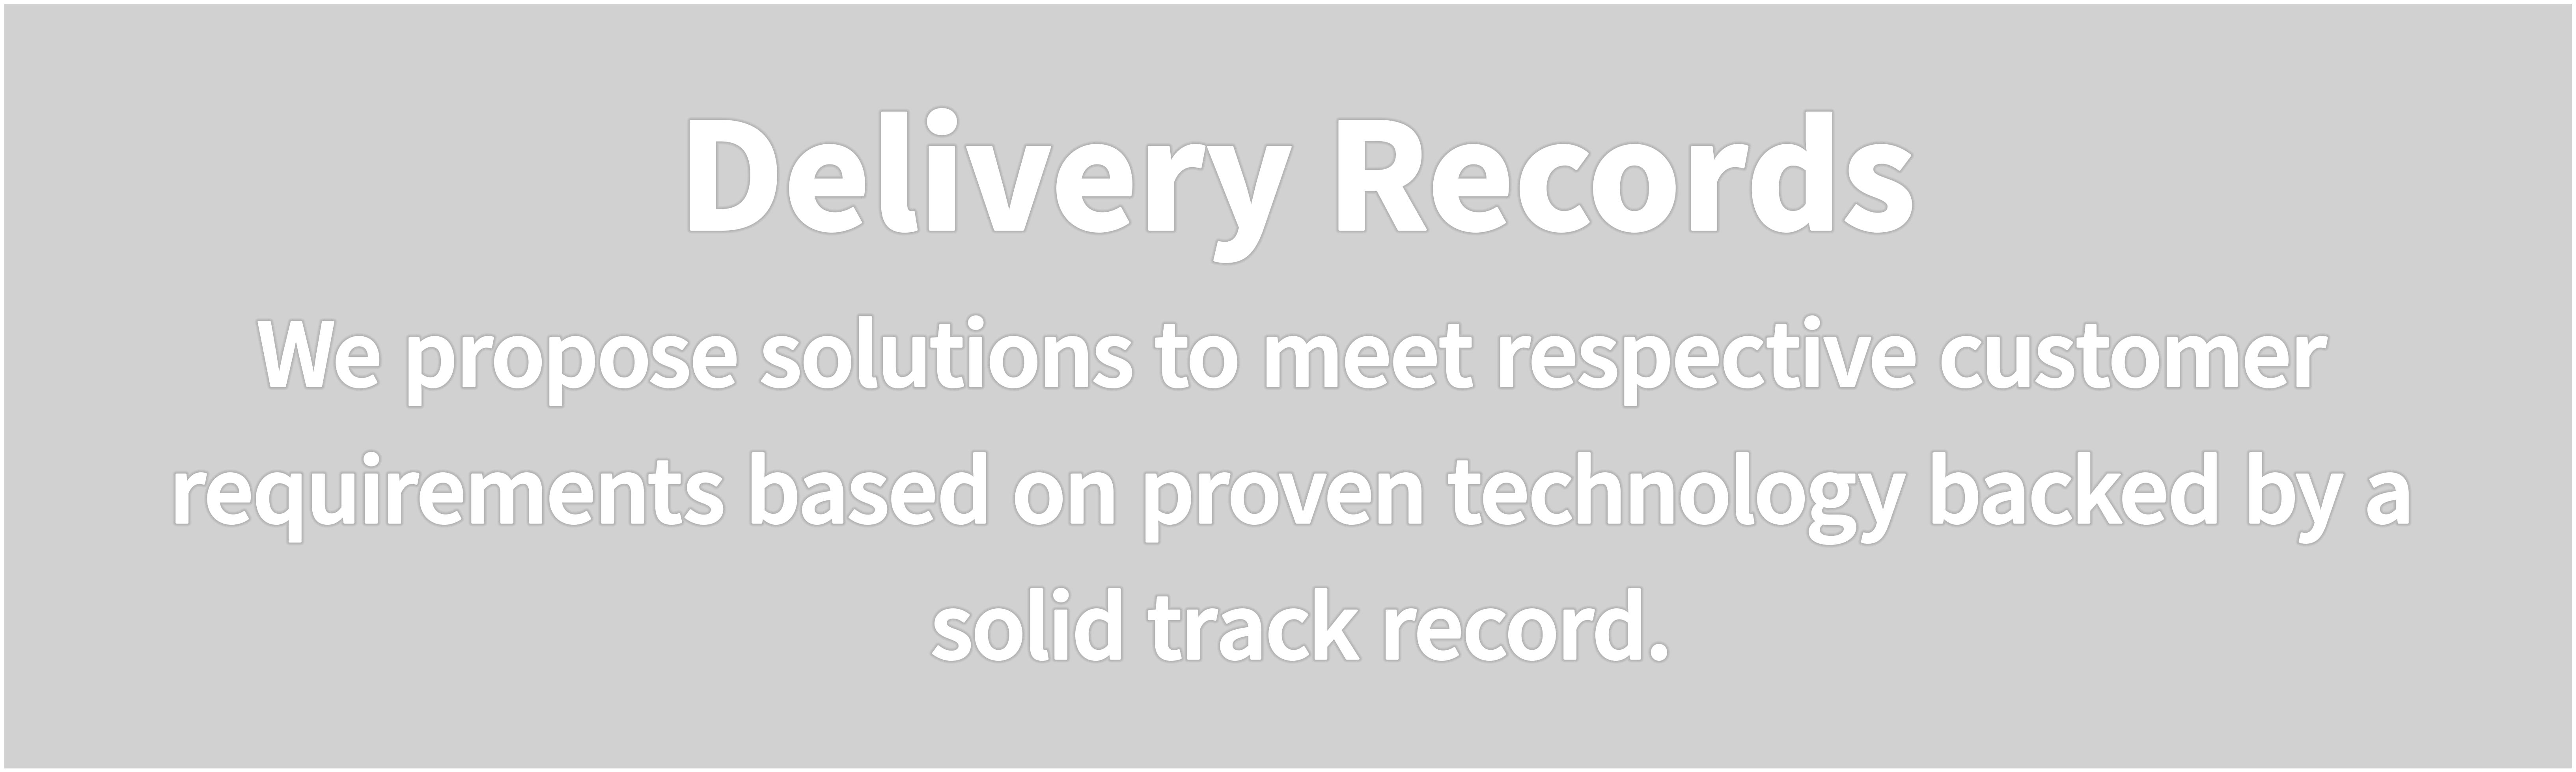 Delivery Records  We propose solutions to meet respective customer requirements based on proven technology backed by a solid track record.